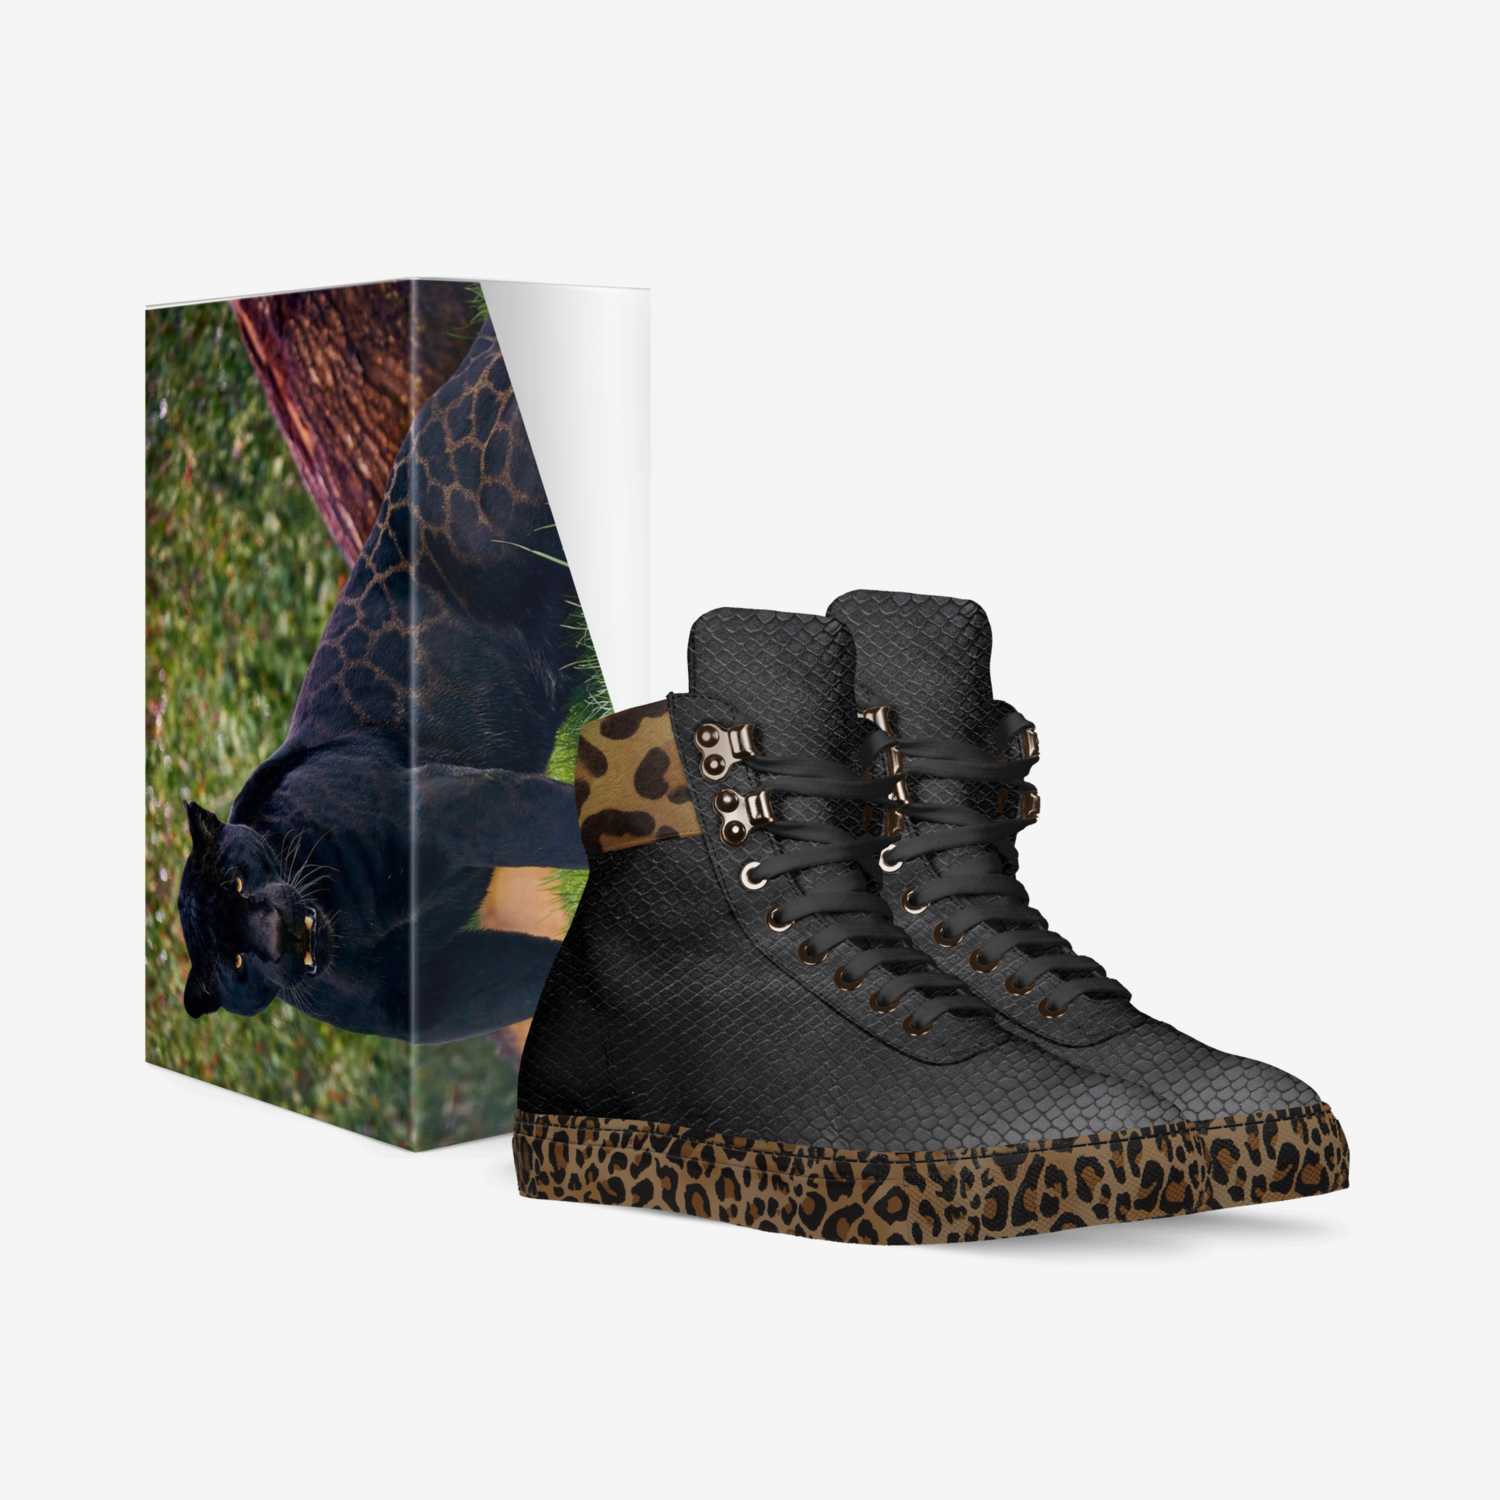 PARDUS LEOPARD custom made in Italy shoes by Devontae Jackson | Box view